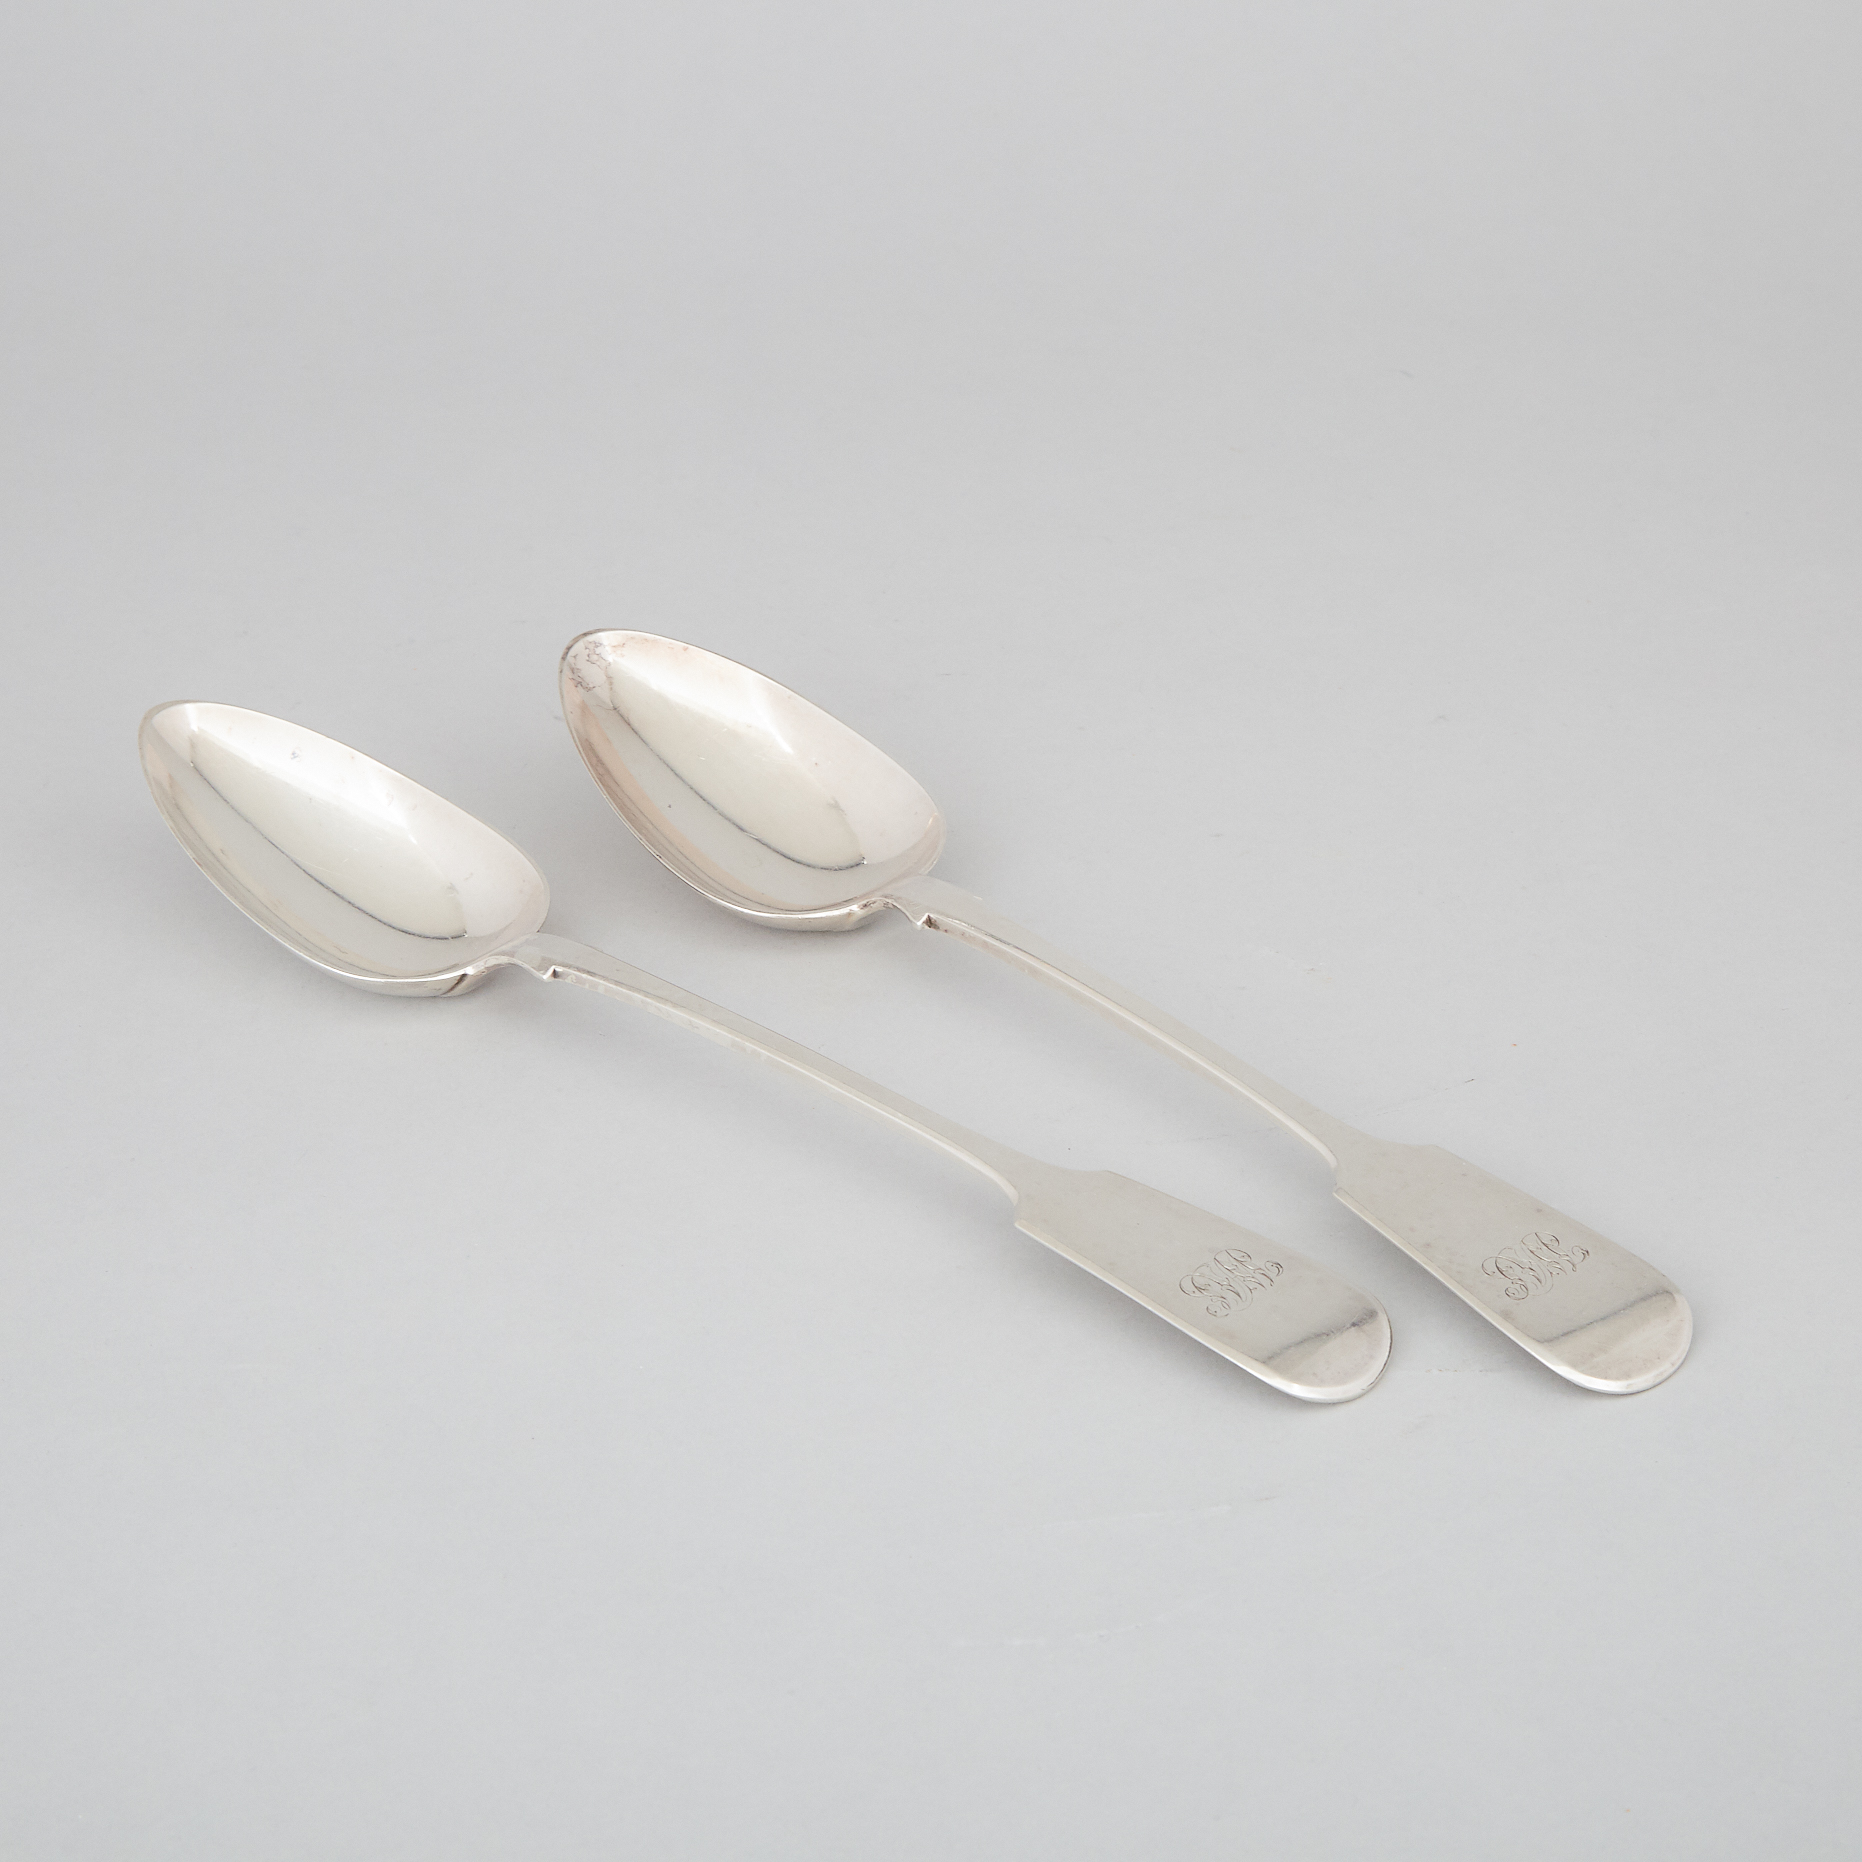 Pair of William IV Silver Fiddle Pattern Serving Spoons, John, Henry & Charles Lias, London, 1835